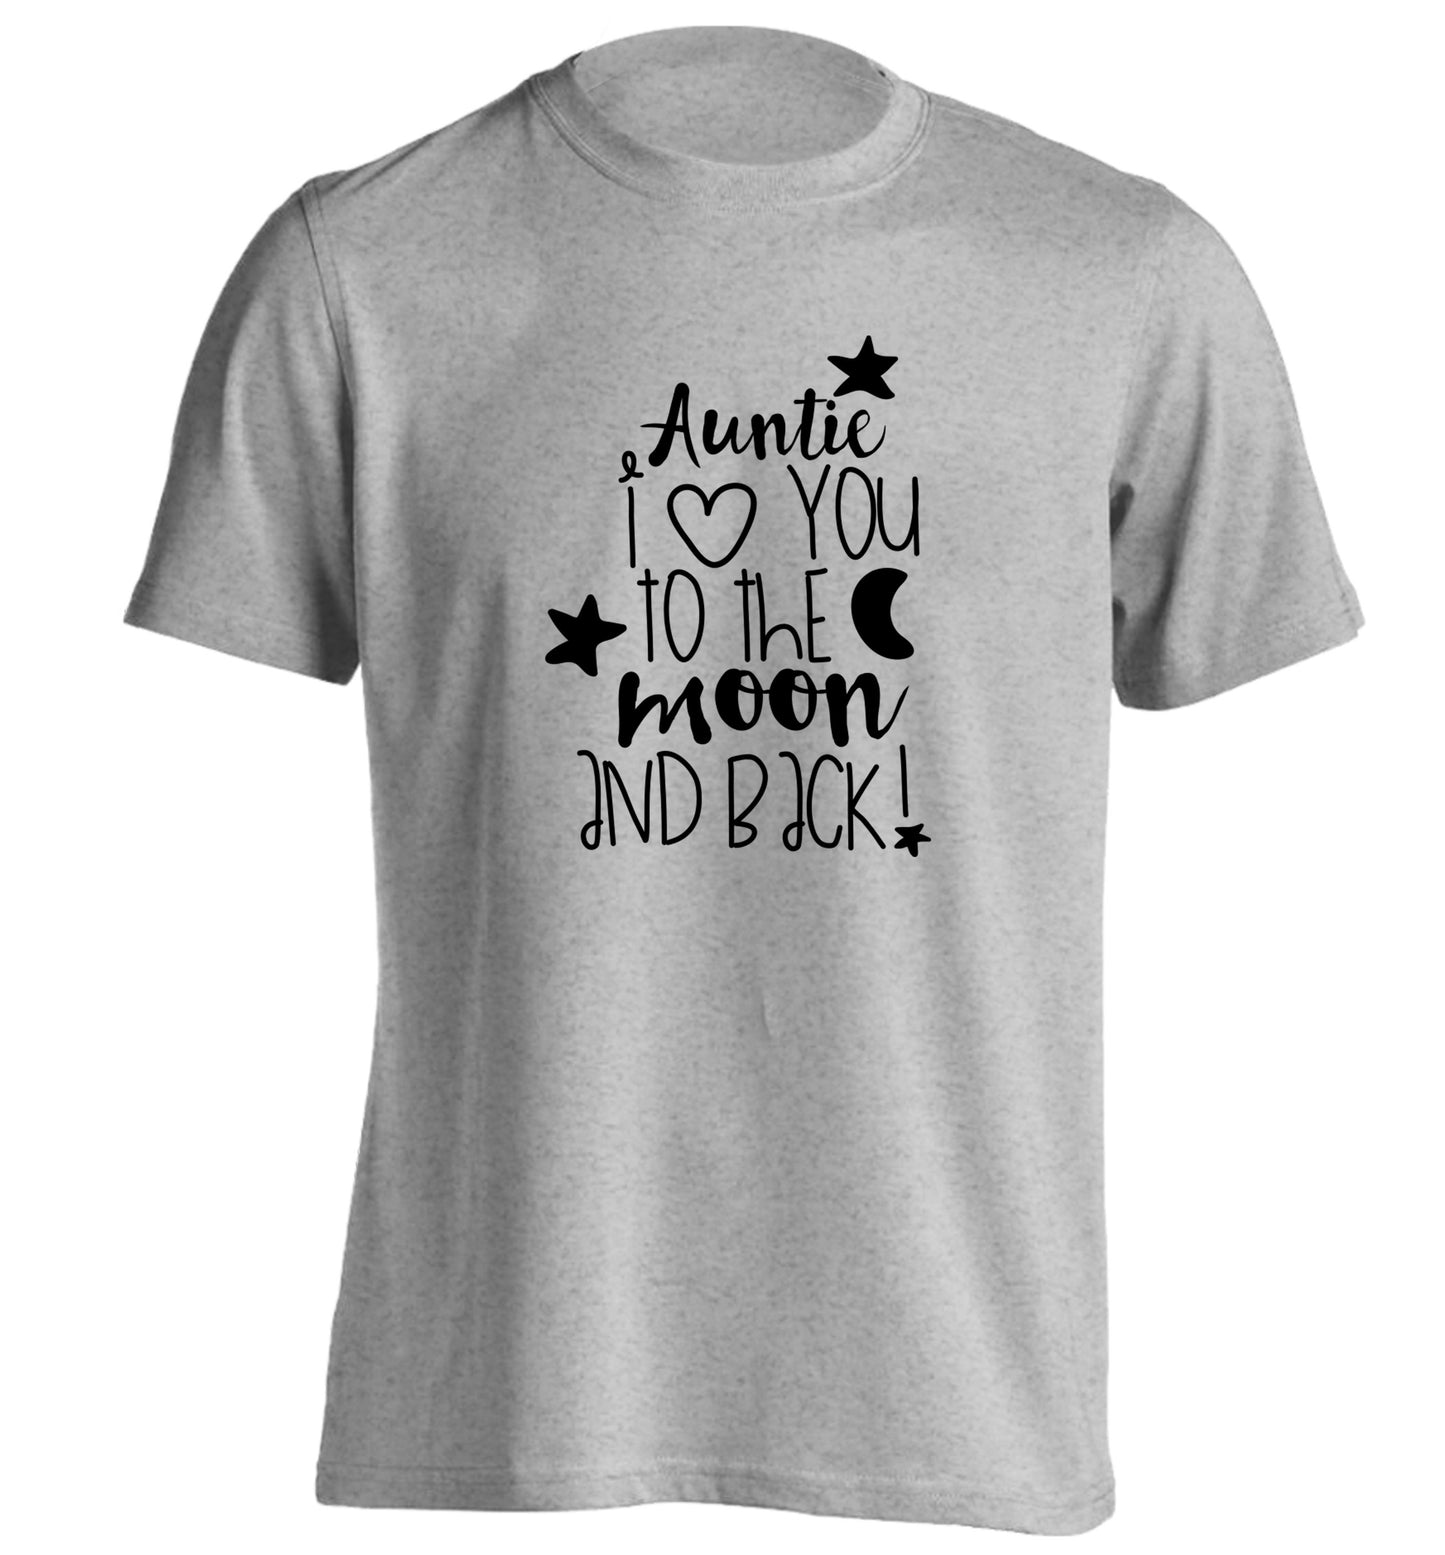 Auntie I love you to the moon and back adults unisex grey Tshirt 2XL